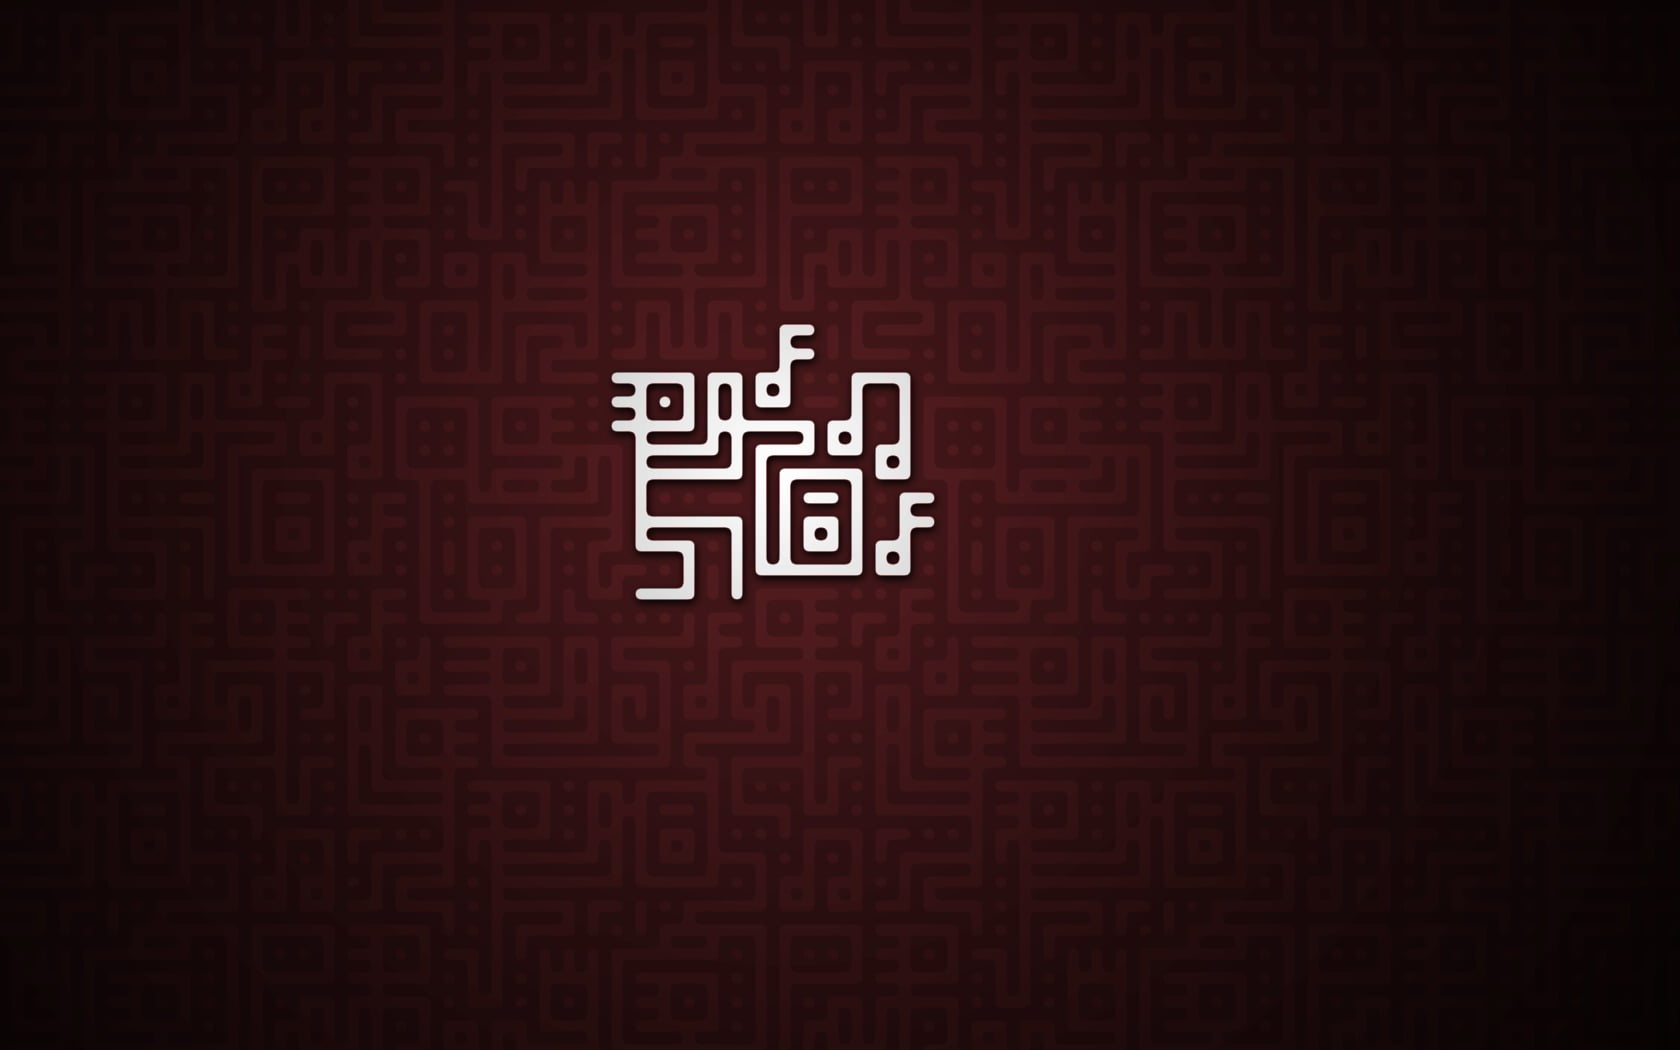 white tribe logo illustration, music, indoors, text, red, no people